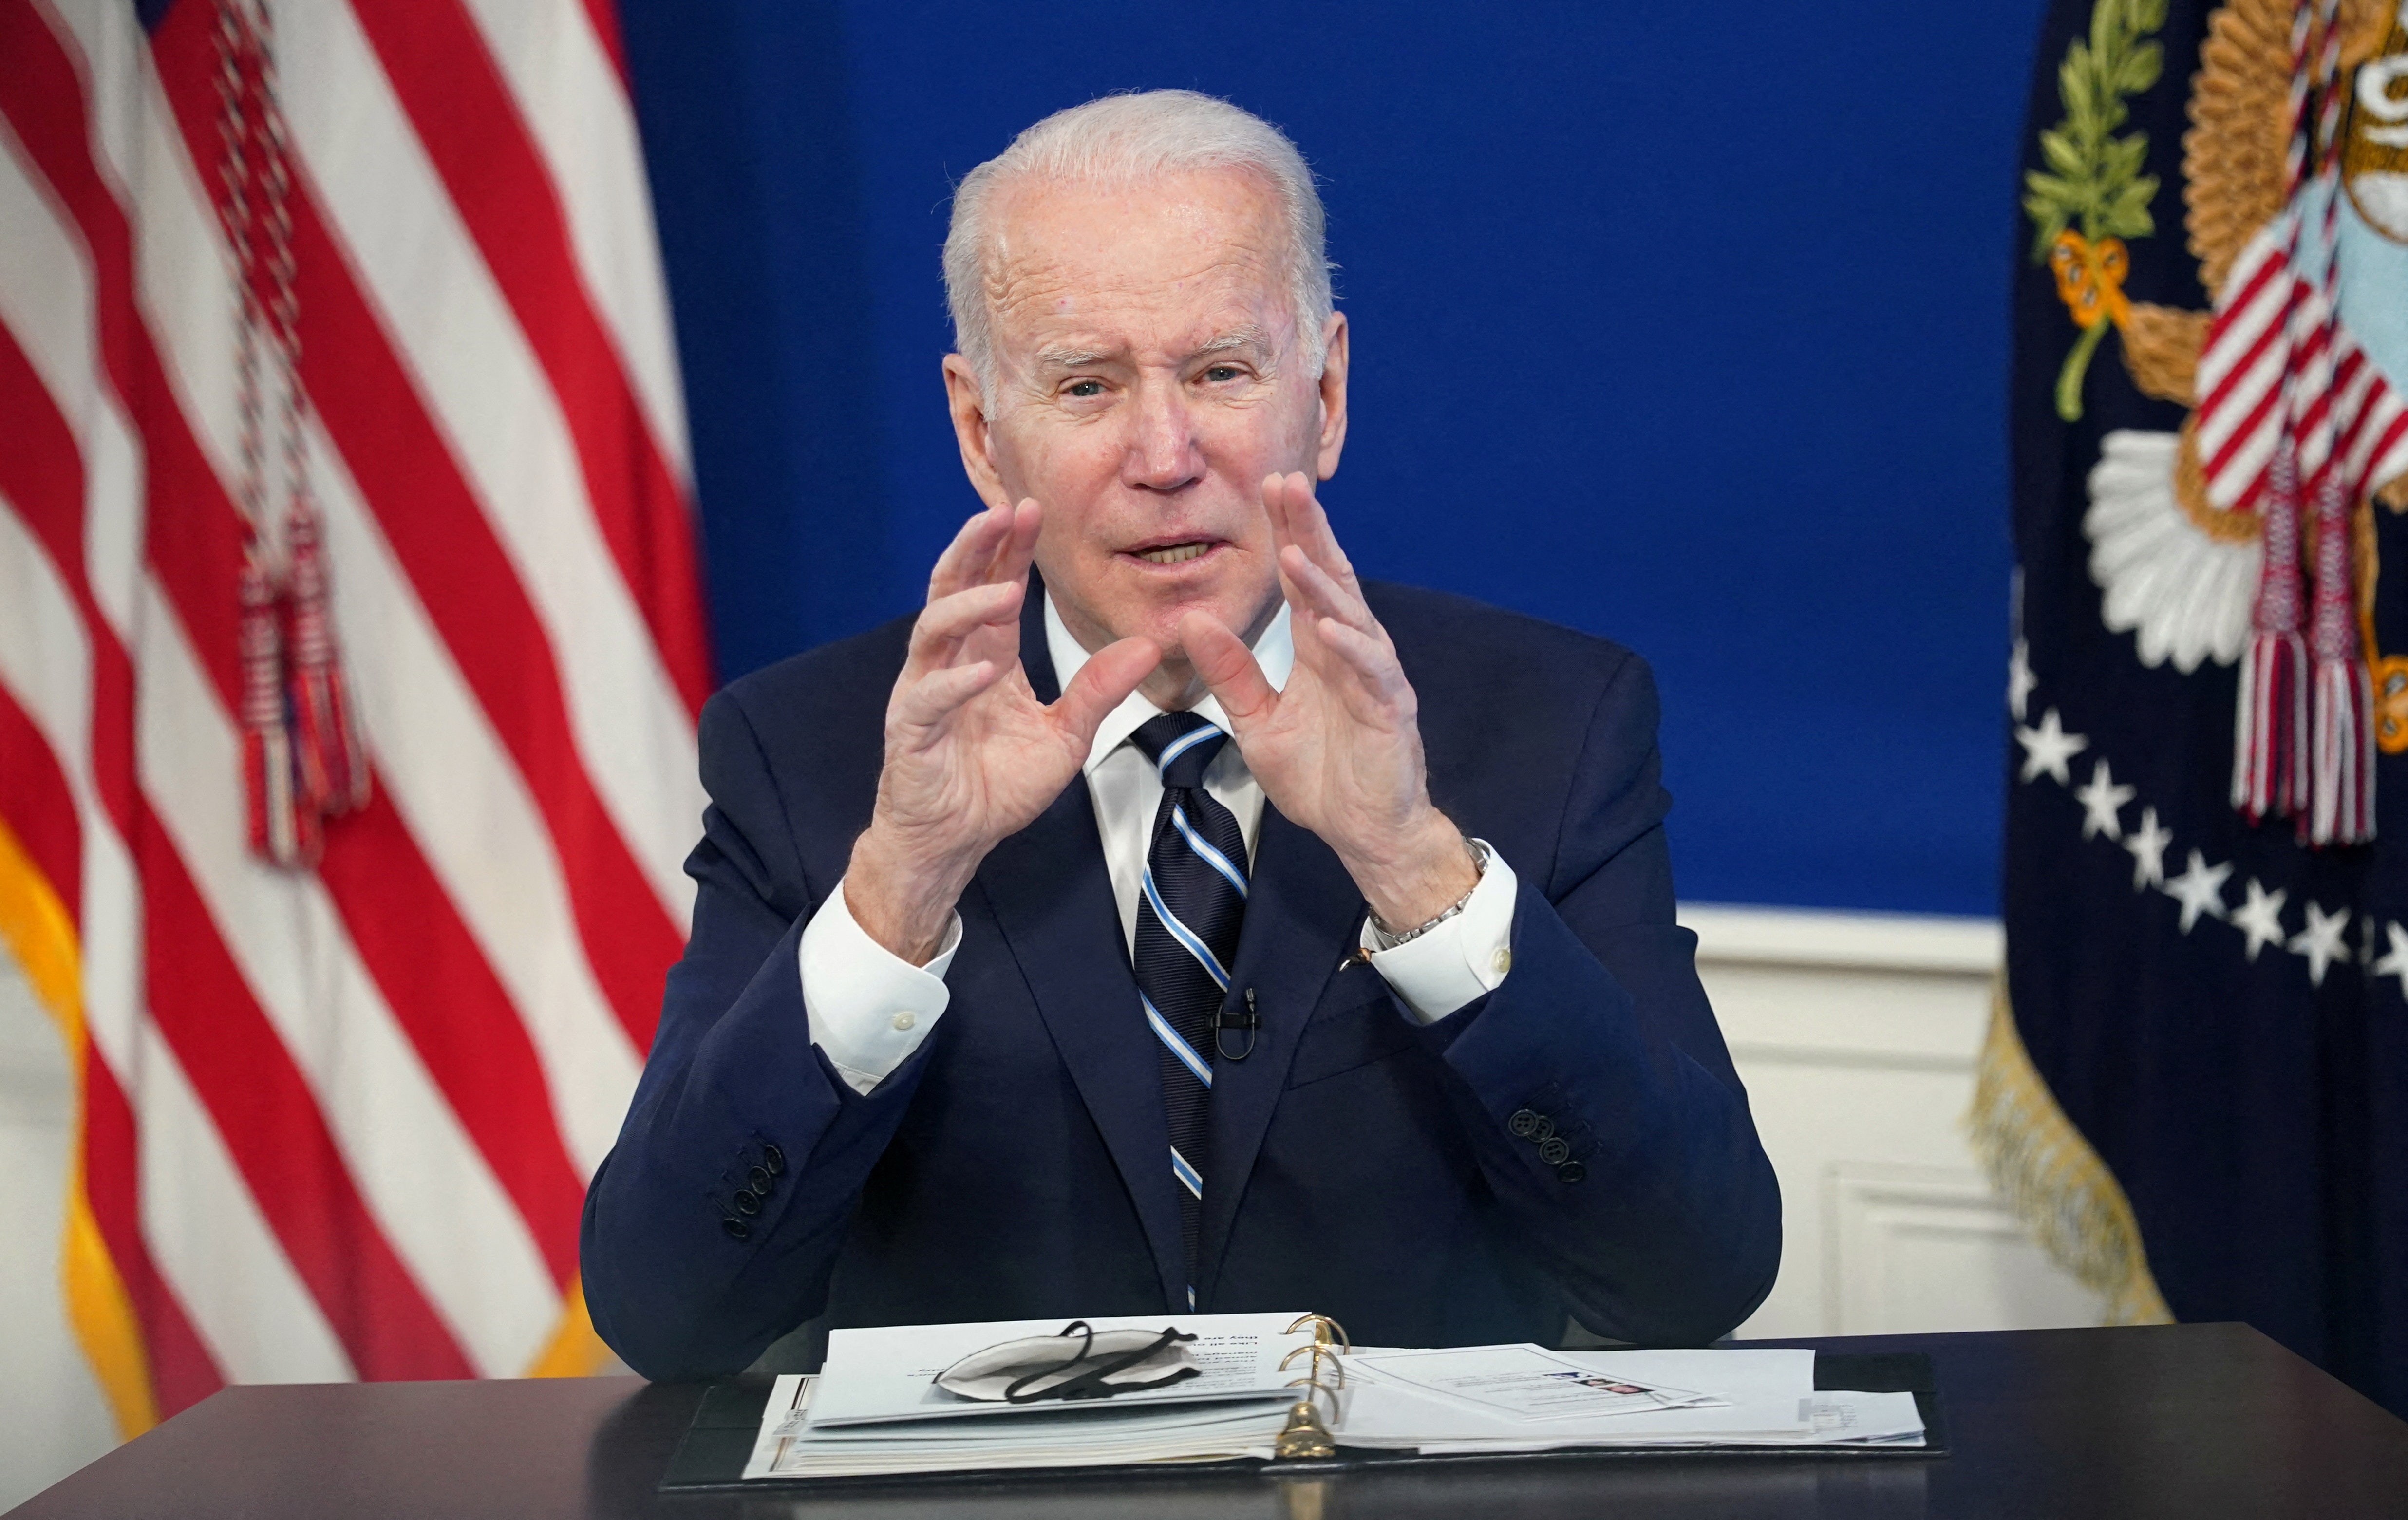 Biden White House pummeled for rollout of COVID tests expected to ship ‘within 7-12 days of ordering’ – Fox News